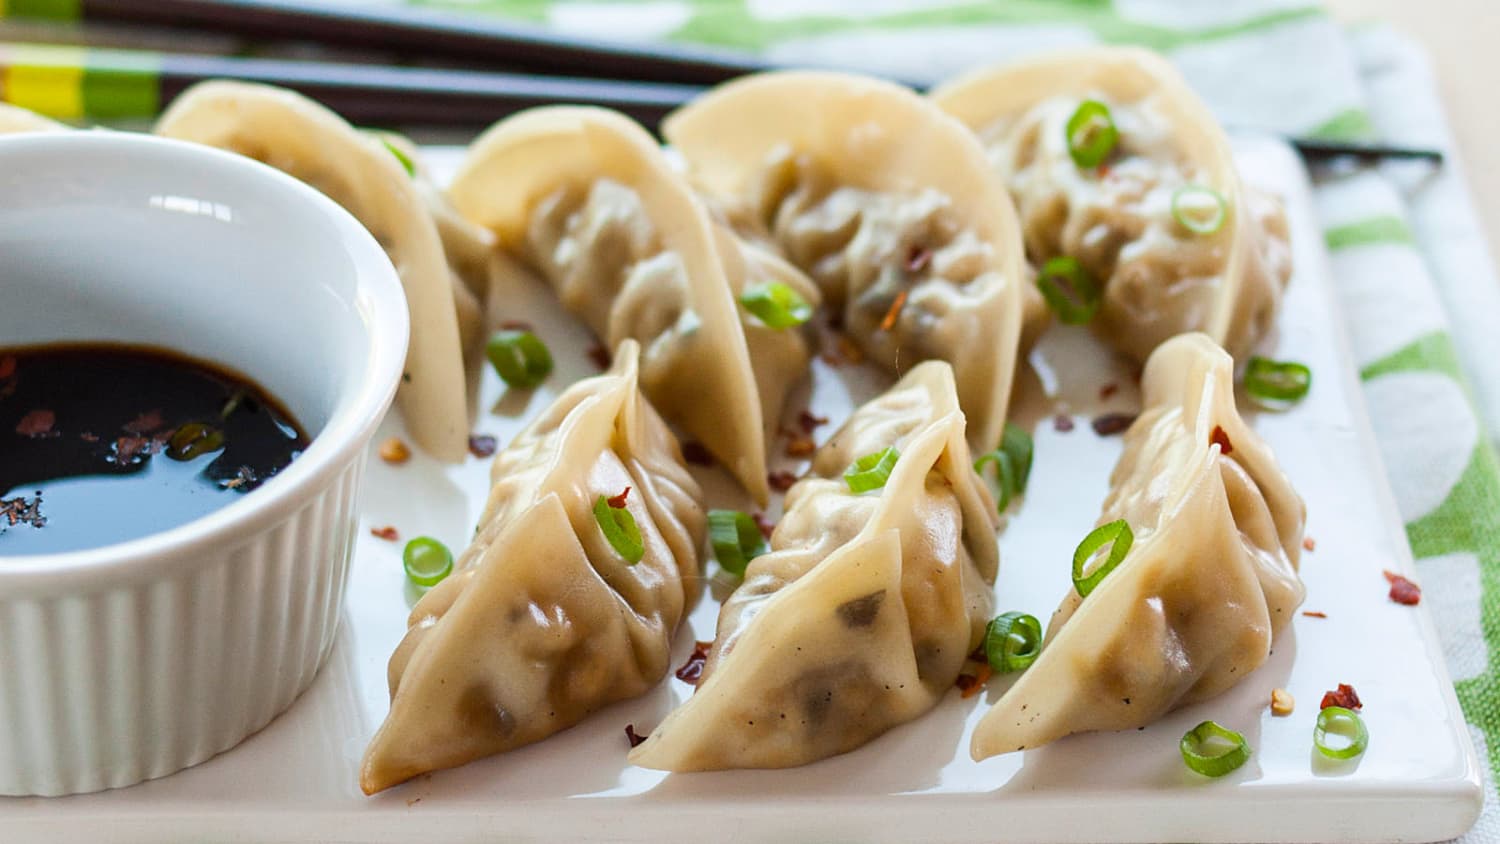 How To Make Homemade Asian Dumplings From Scratch Kitchn